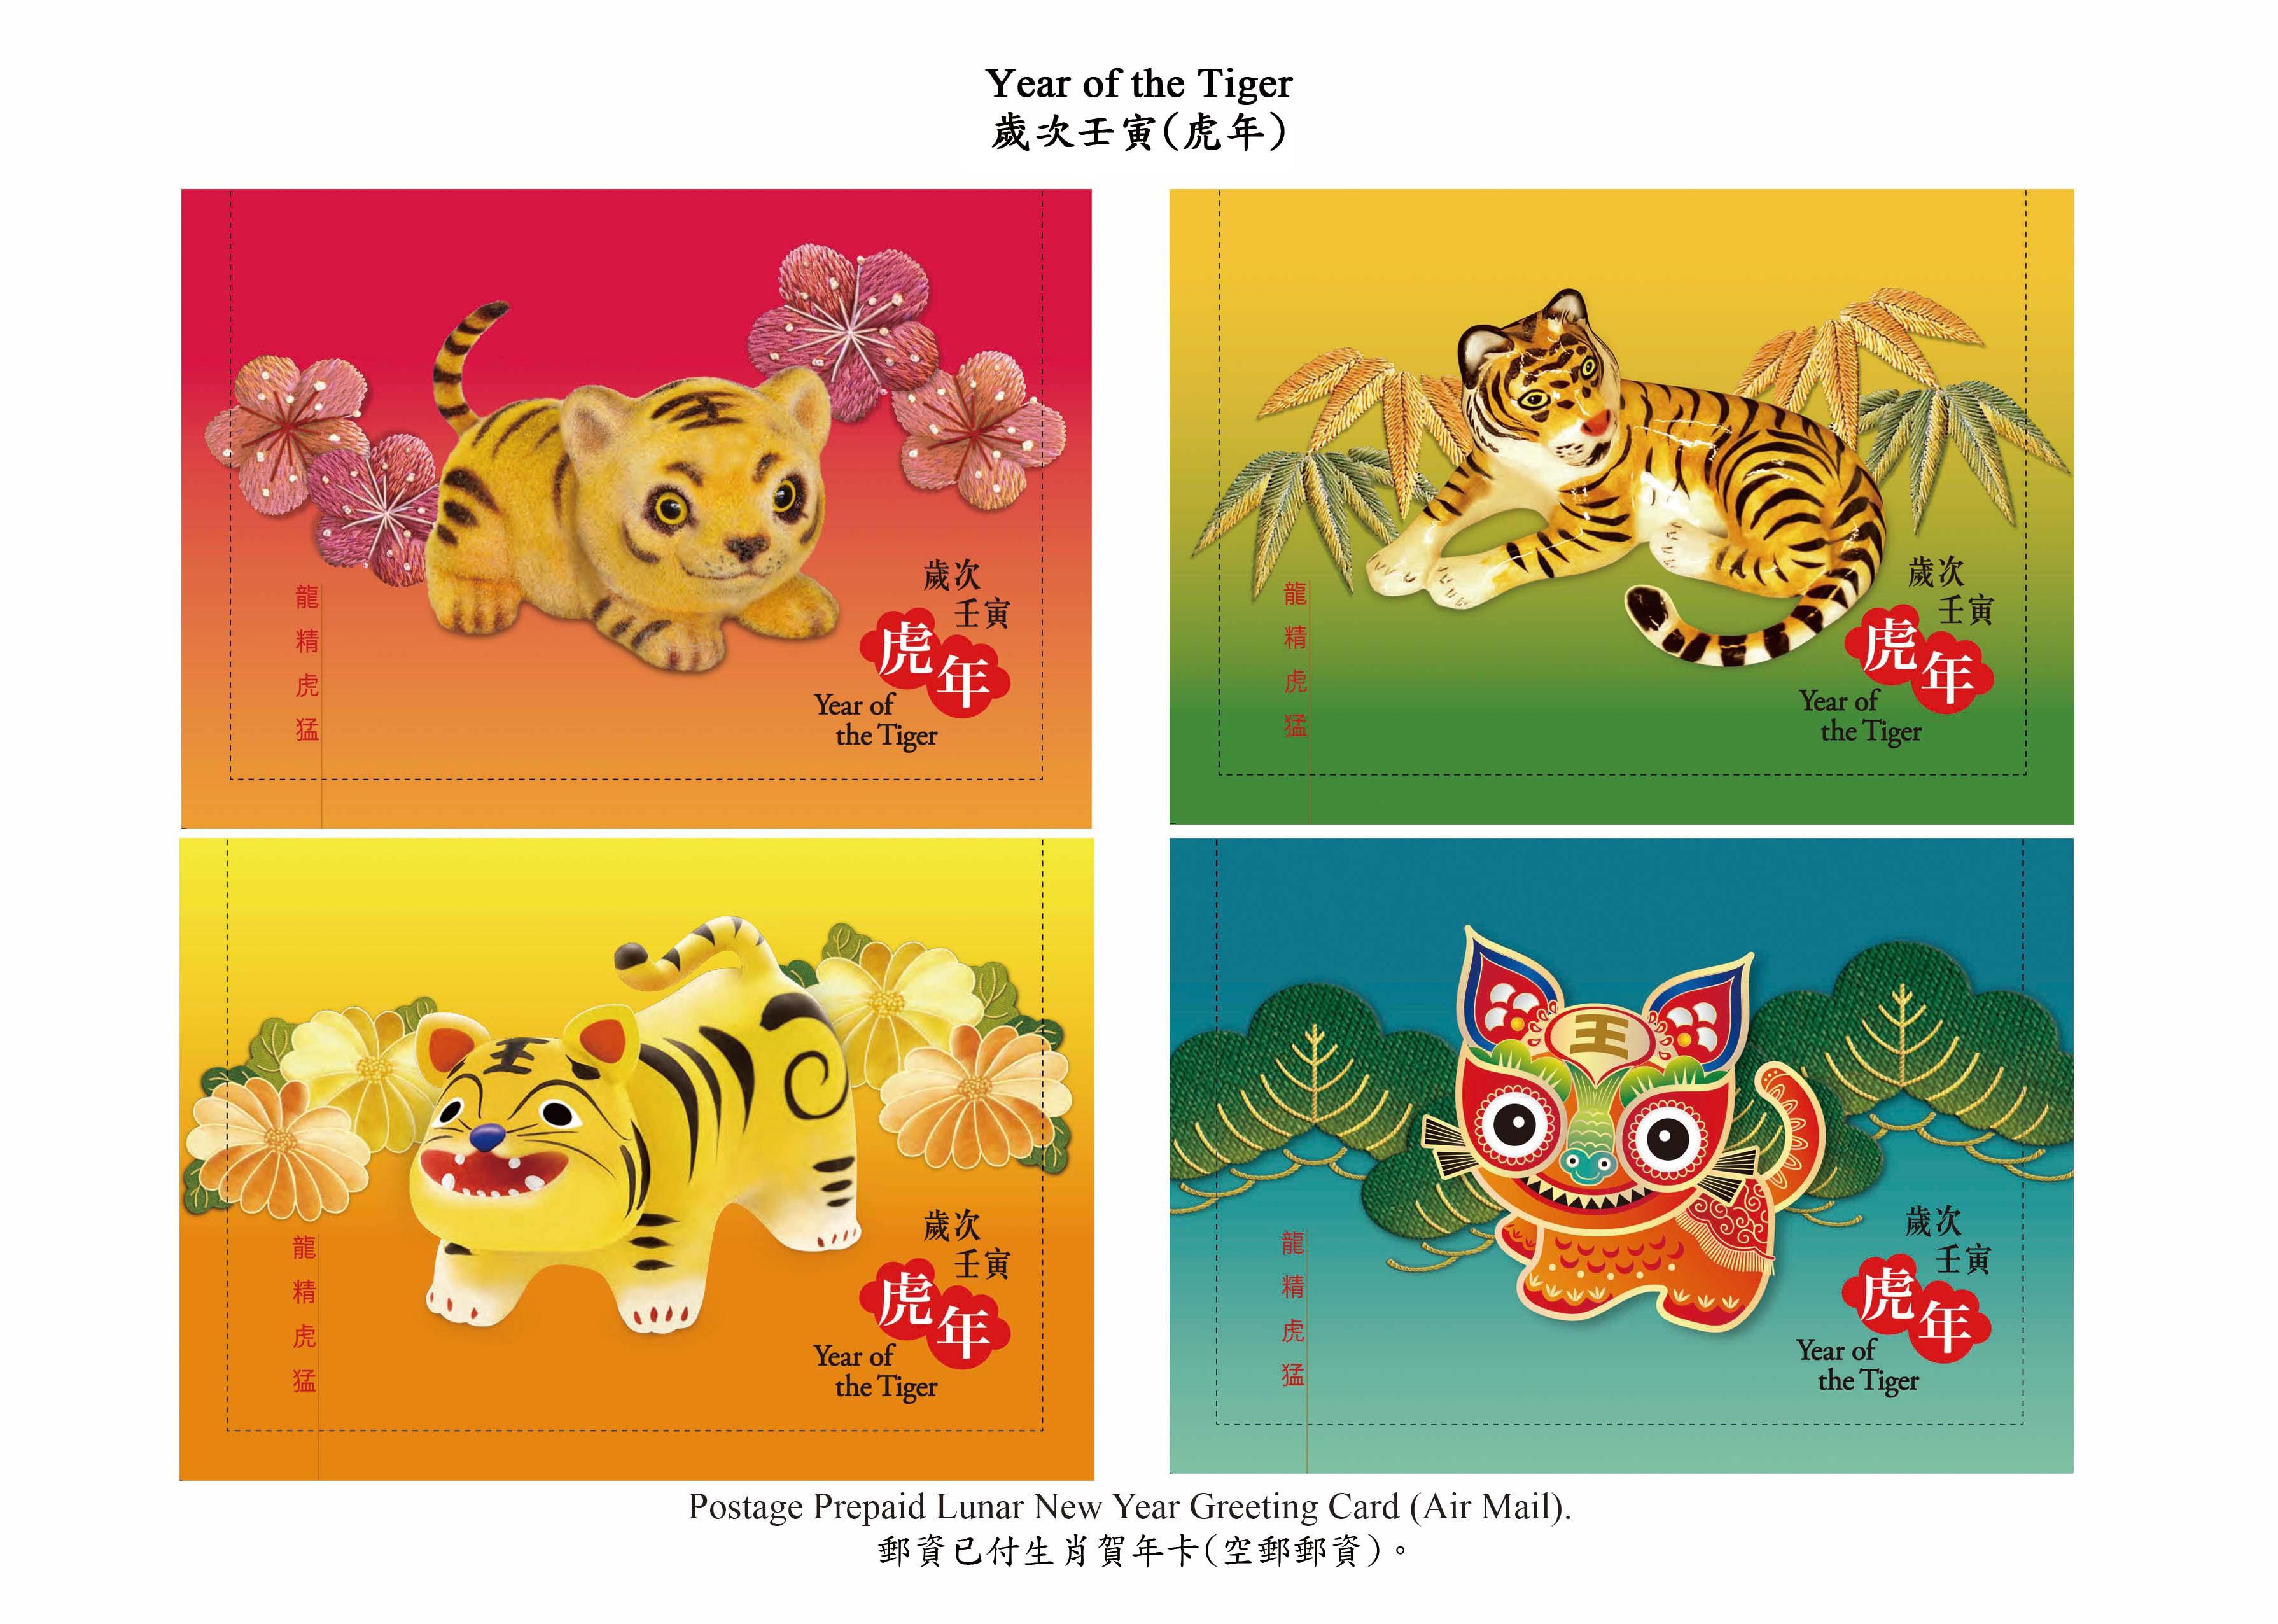 Hongkong Post will launch a special stamp issue and associated philatelic products with the theme "Year of the Tiger" on January 18 (Tuesday). Photo shows the postage prepaid lunar new year greeting cards (air mail).

